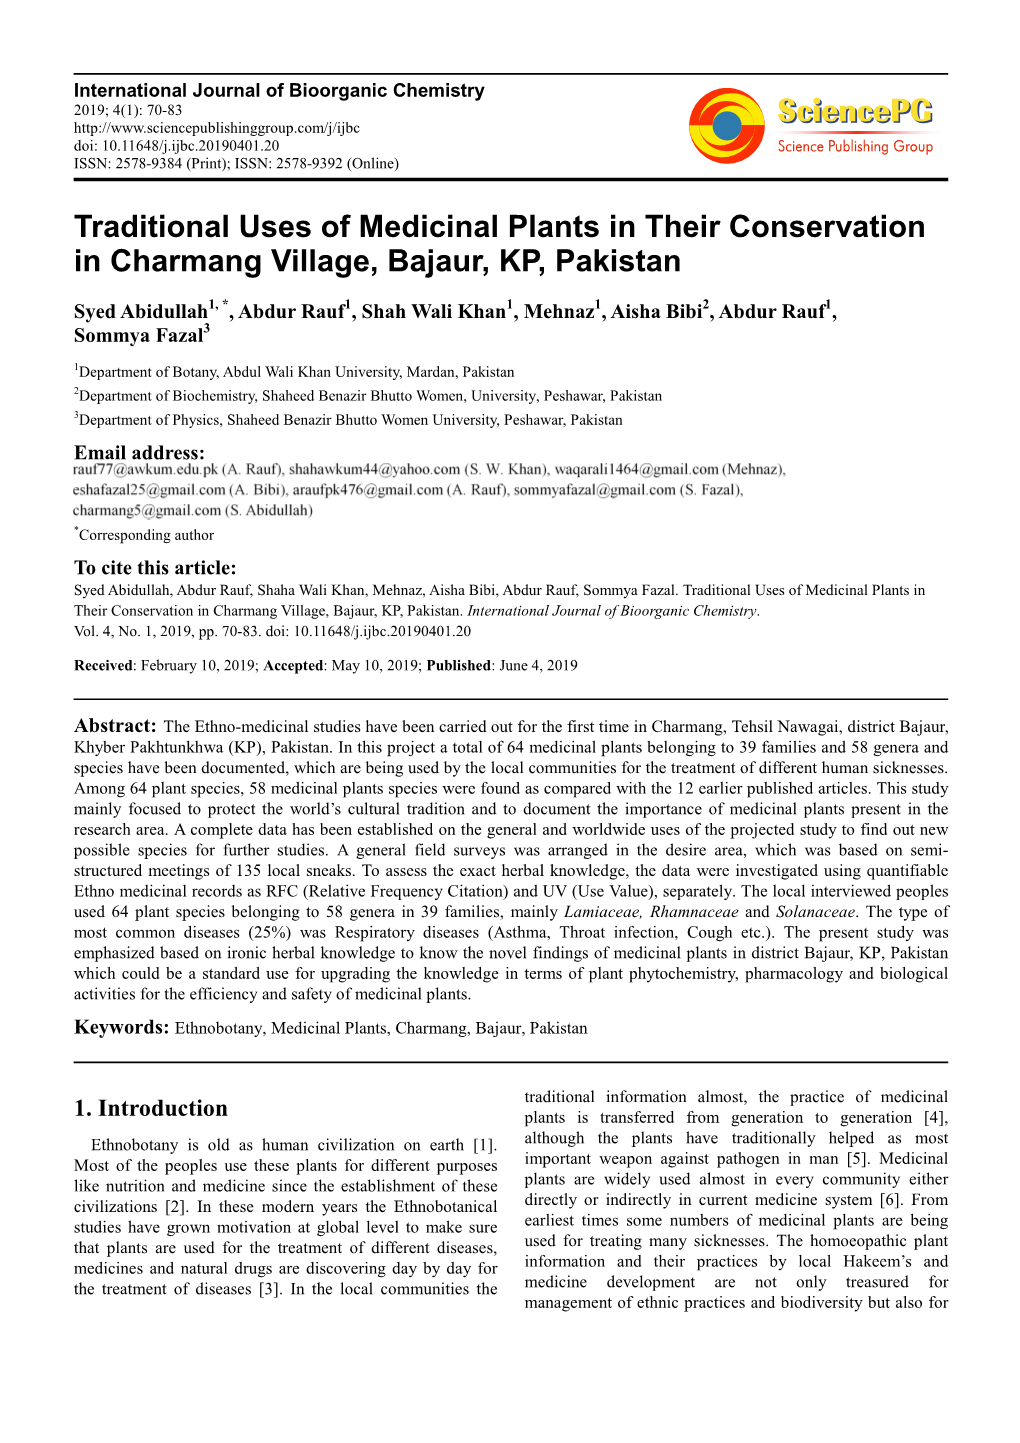 Traditional Uses of Medicinal Plants in Their Conservation in Charmang Village, Bajaur, KP, Pakistan